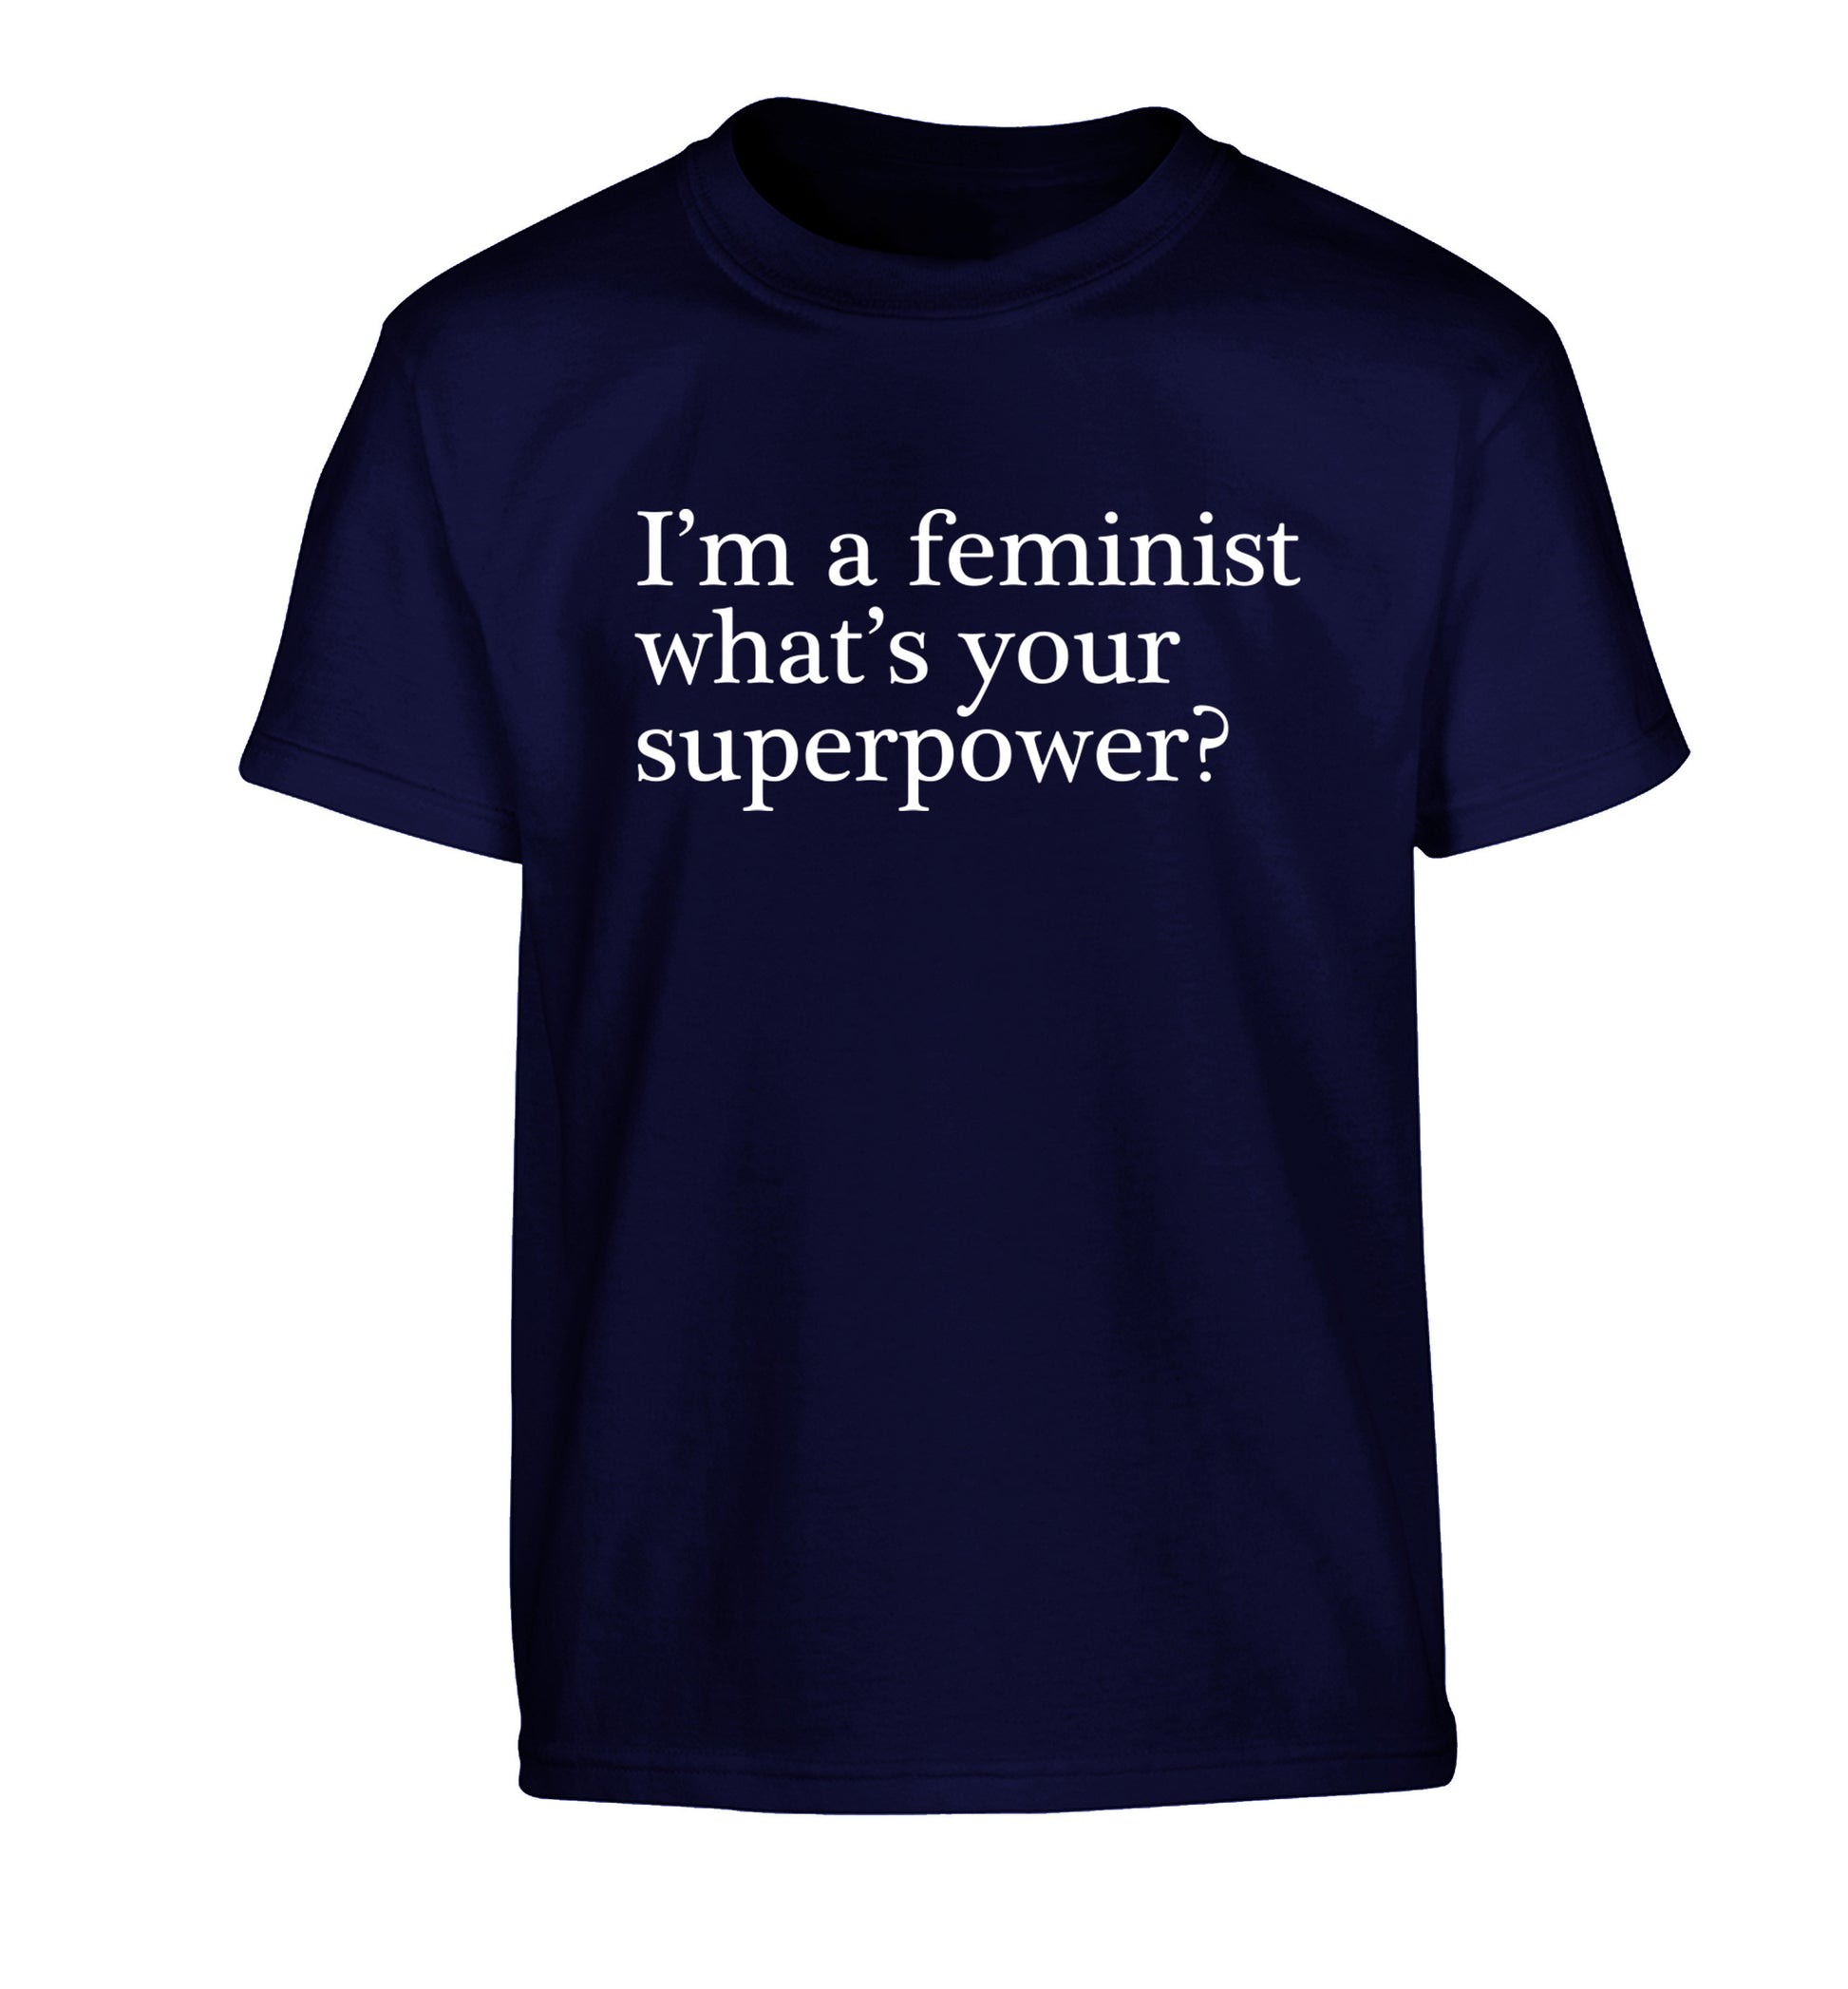 I'm a feminist what's your superpower? Children's navy Tshirt 12-14 Years